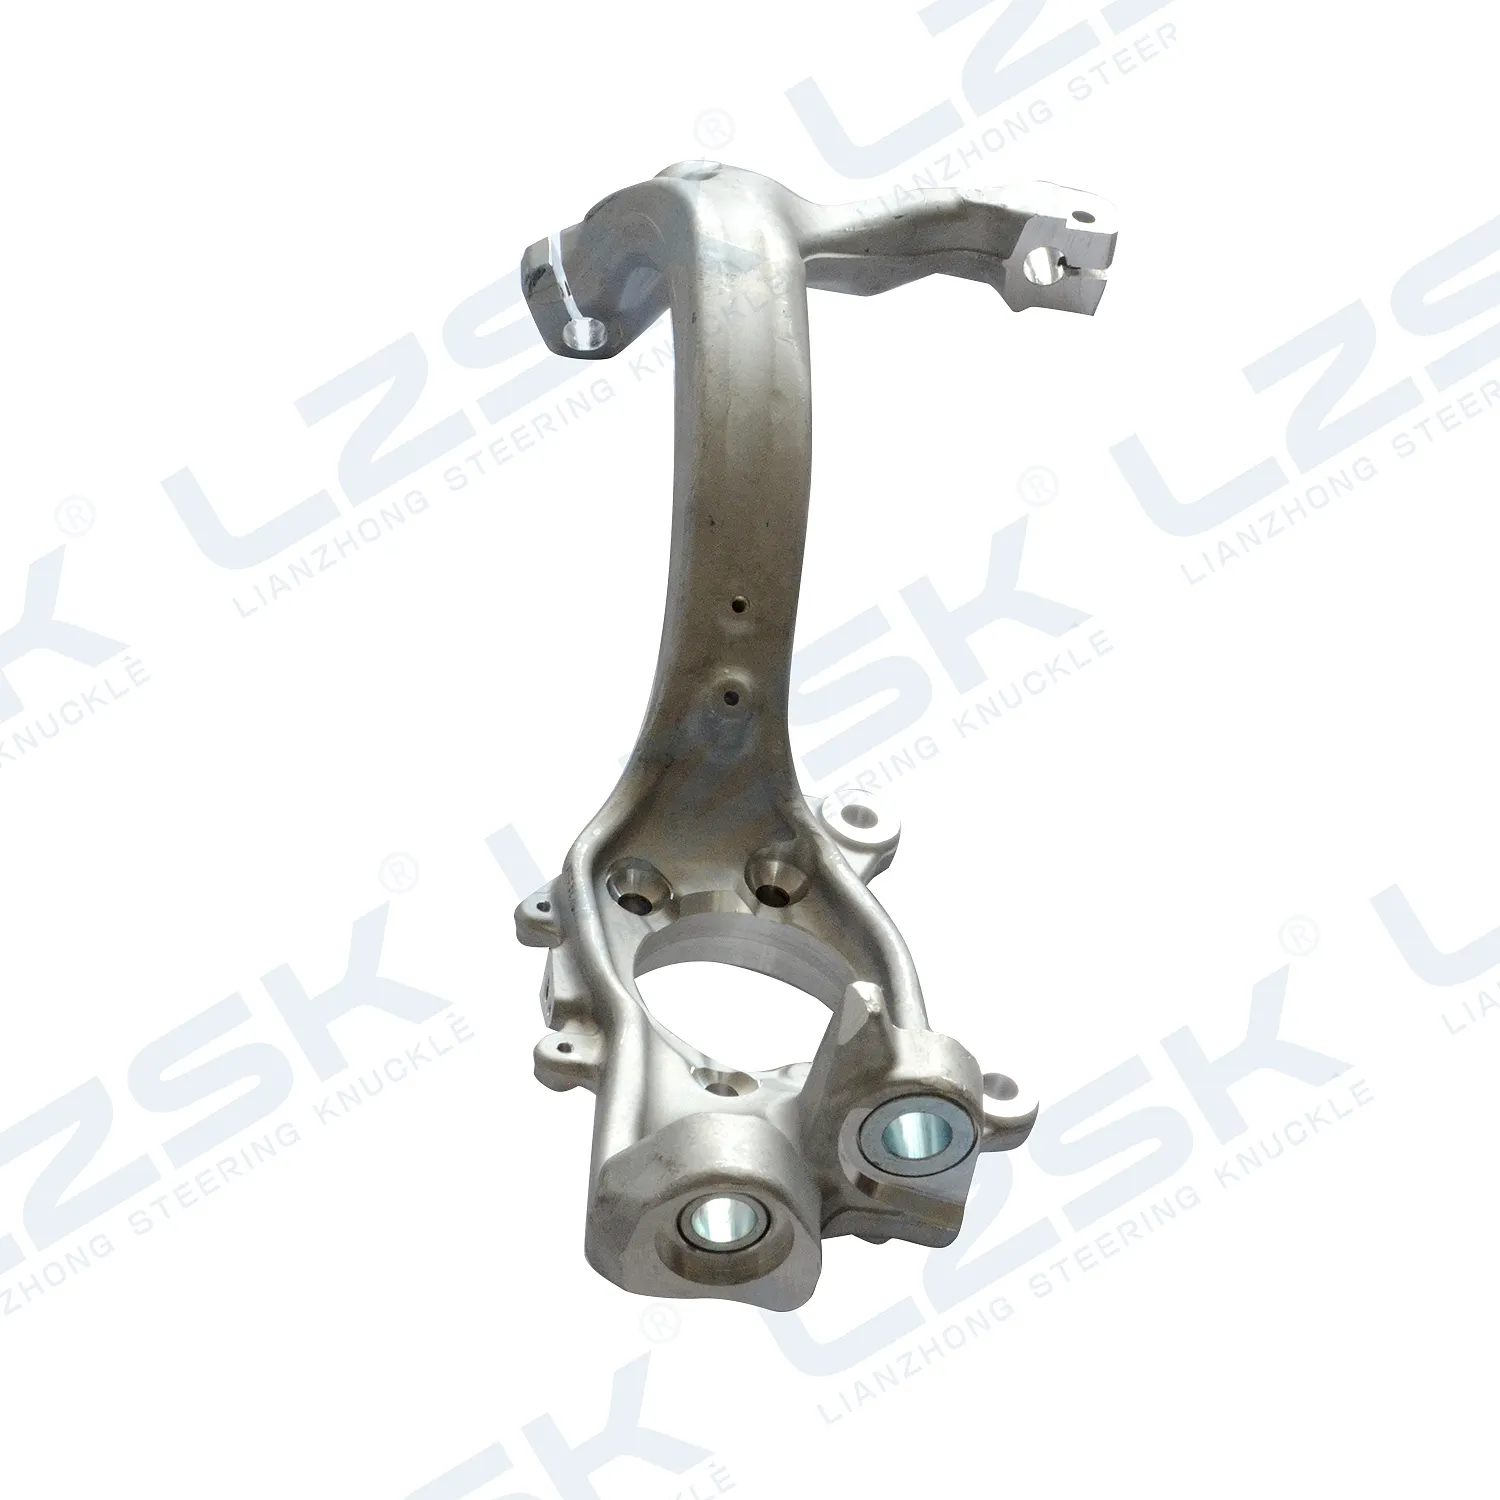 Wholesale Audi A6 C6 4F 2.7tdi 3.0tdi front Left Axle Joint steering knuckle 4F0407253H exporter